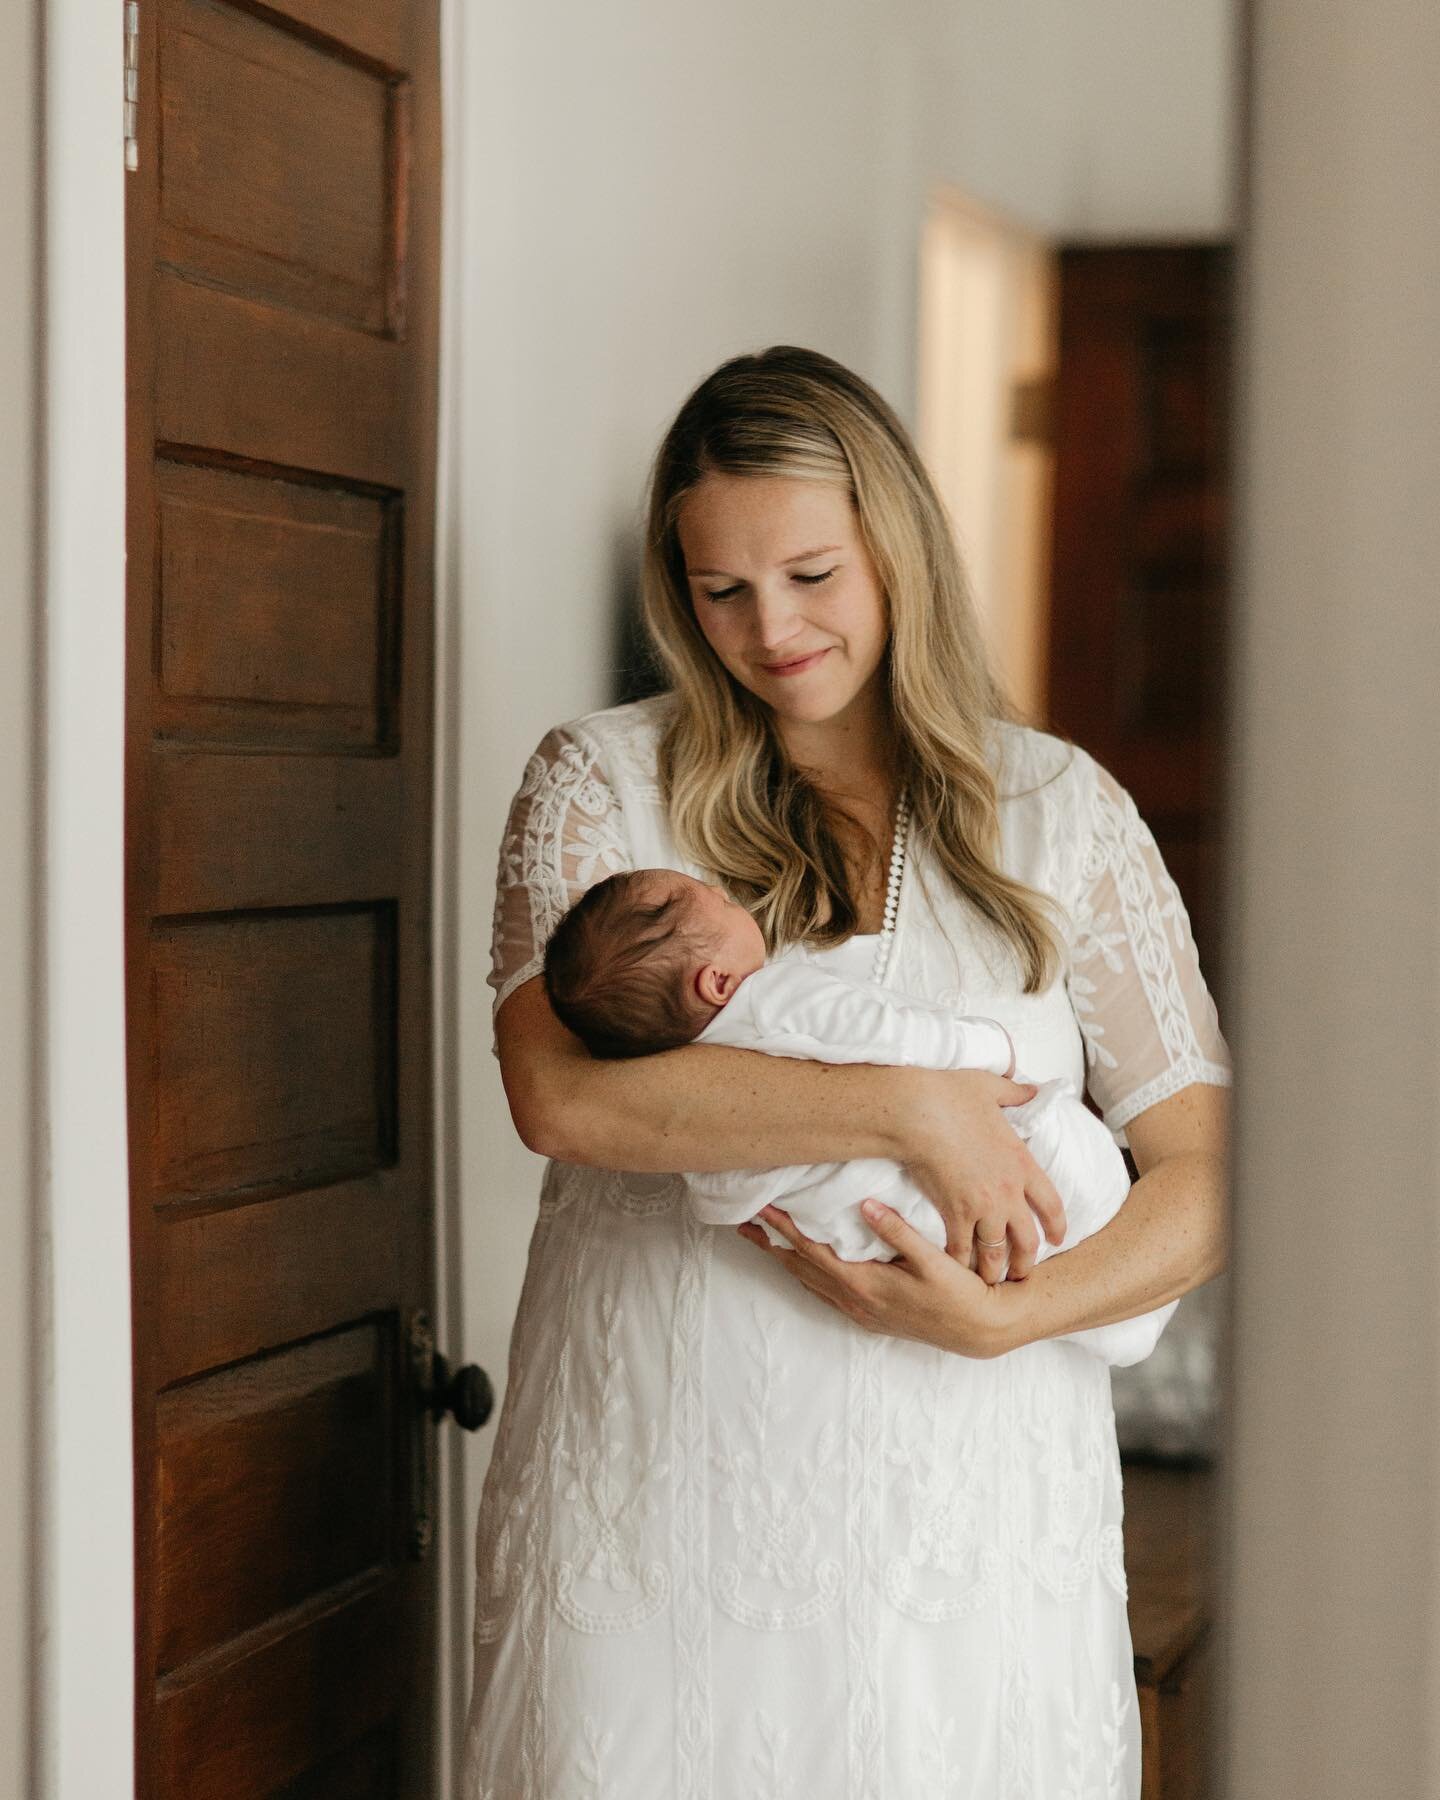 Loved this newborn session with the sweetest family in their historic atlanta home - so much charm + character all around